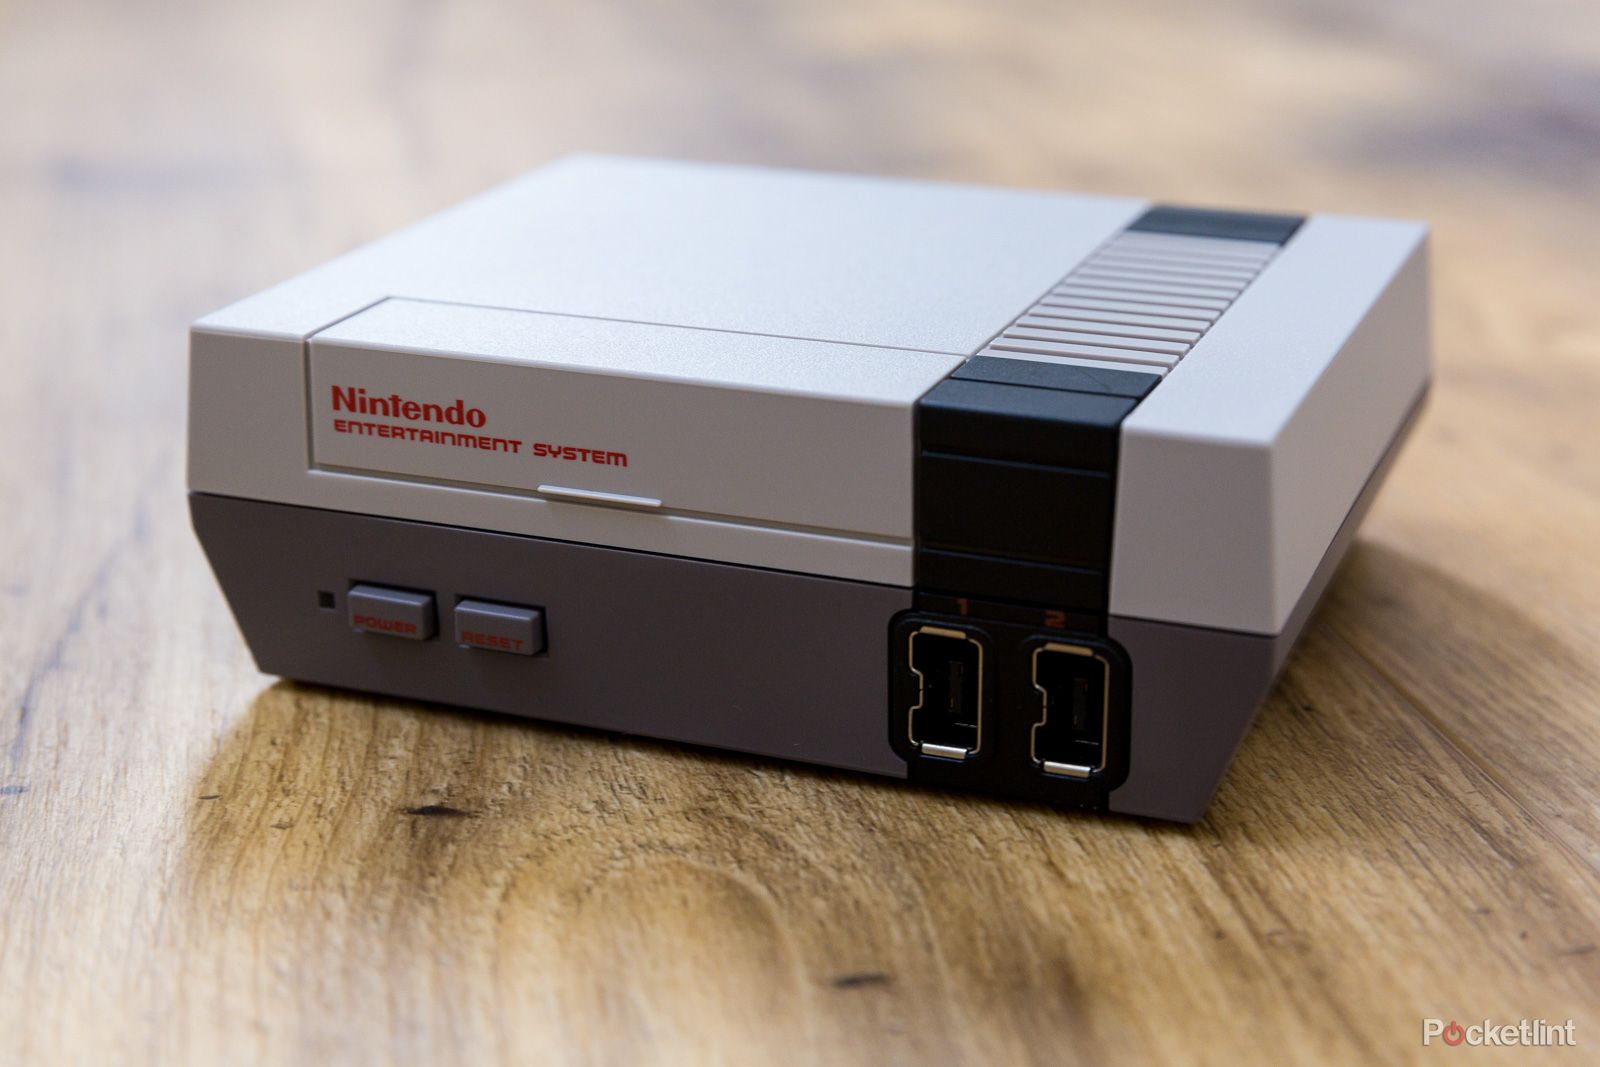 nintendo nes classic mini consoles back in production will launch in june image 1